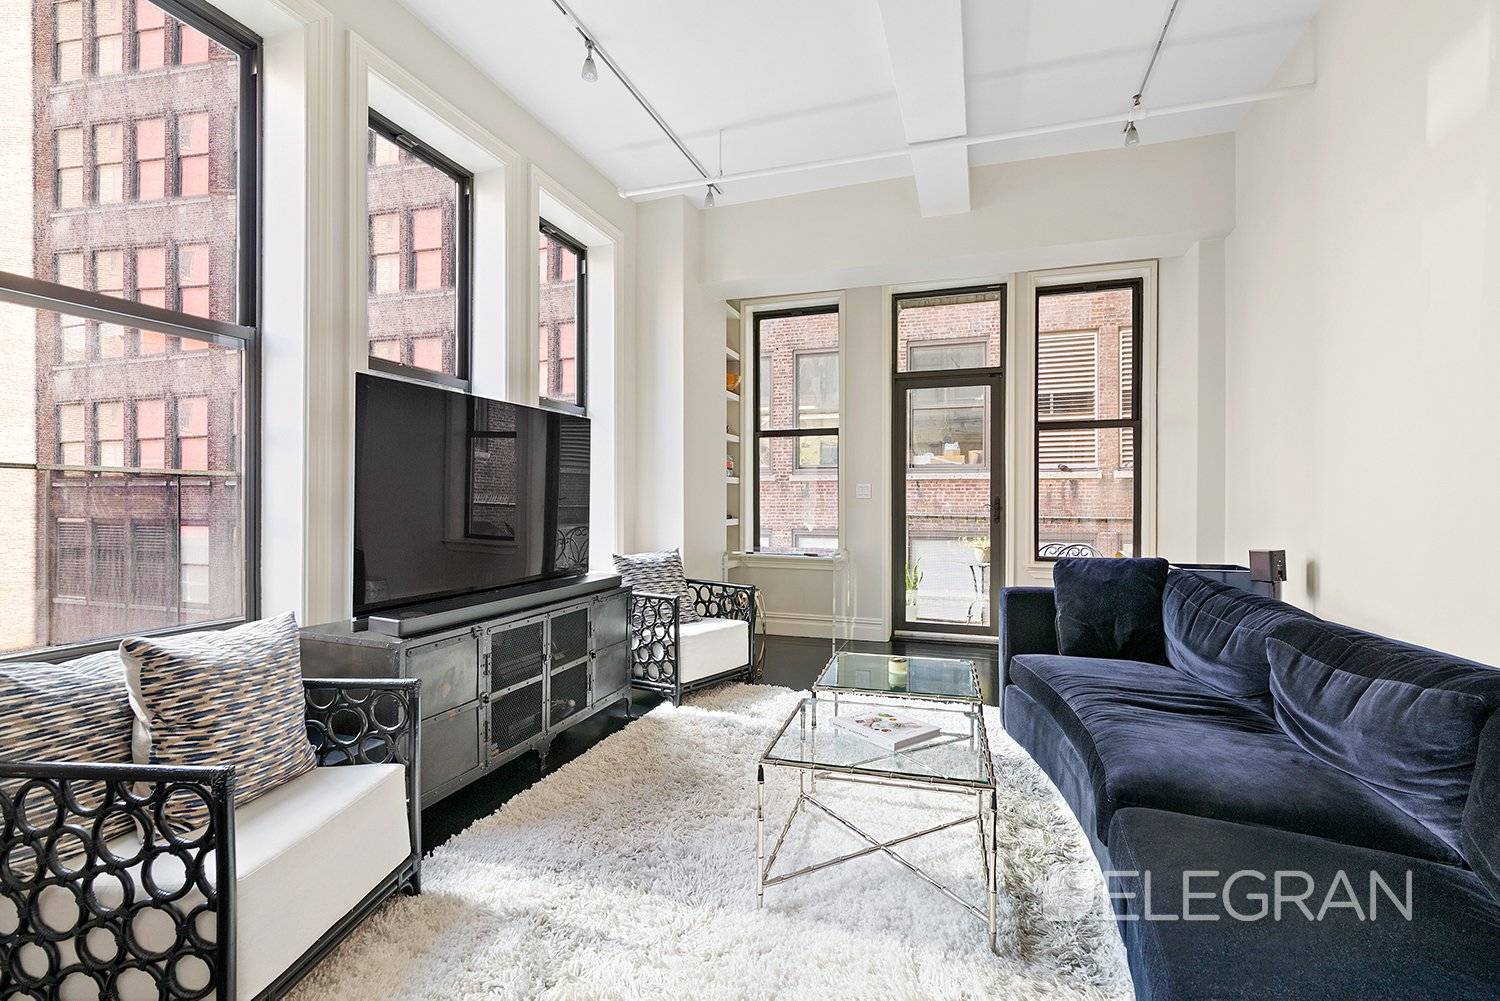 Luxurious New York City living is yours to enjoy in this stunning condo.